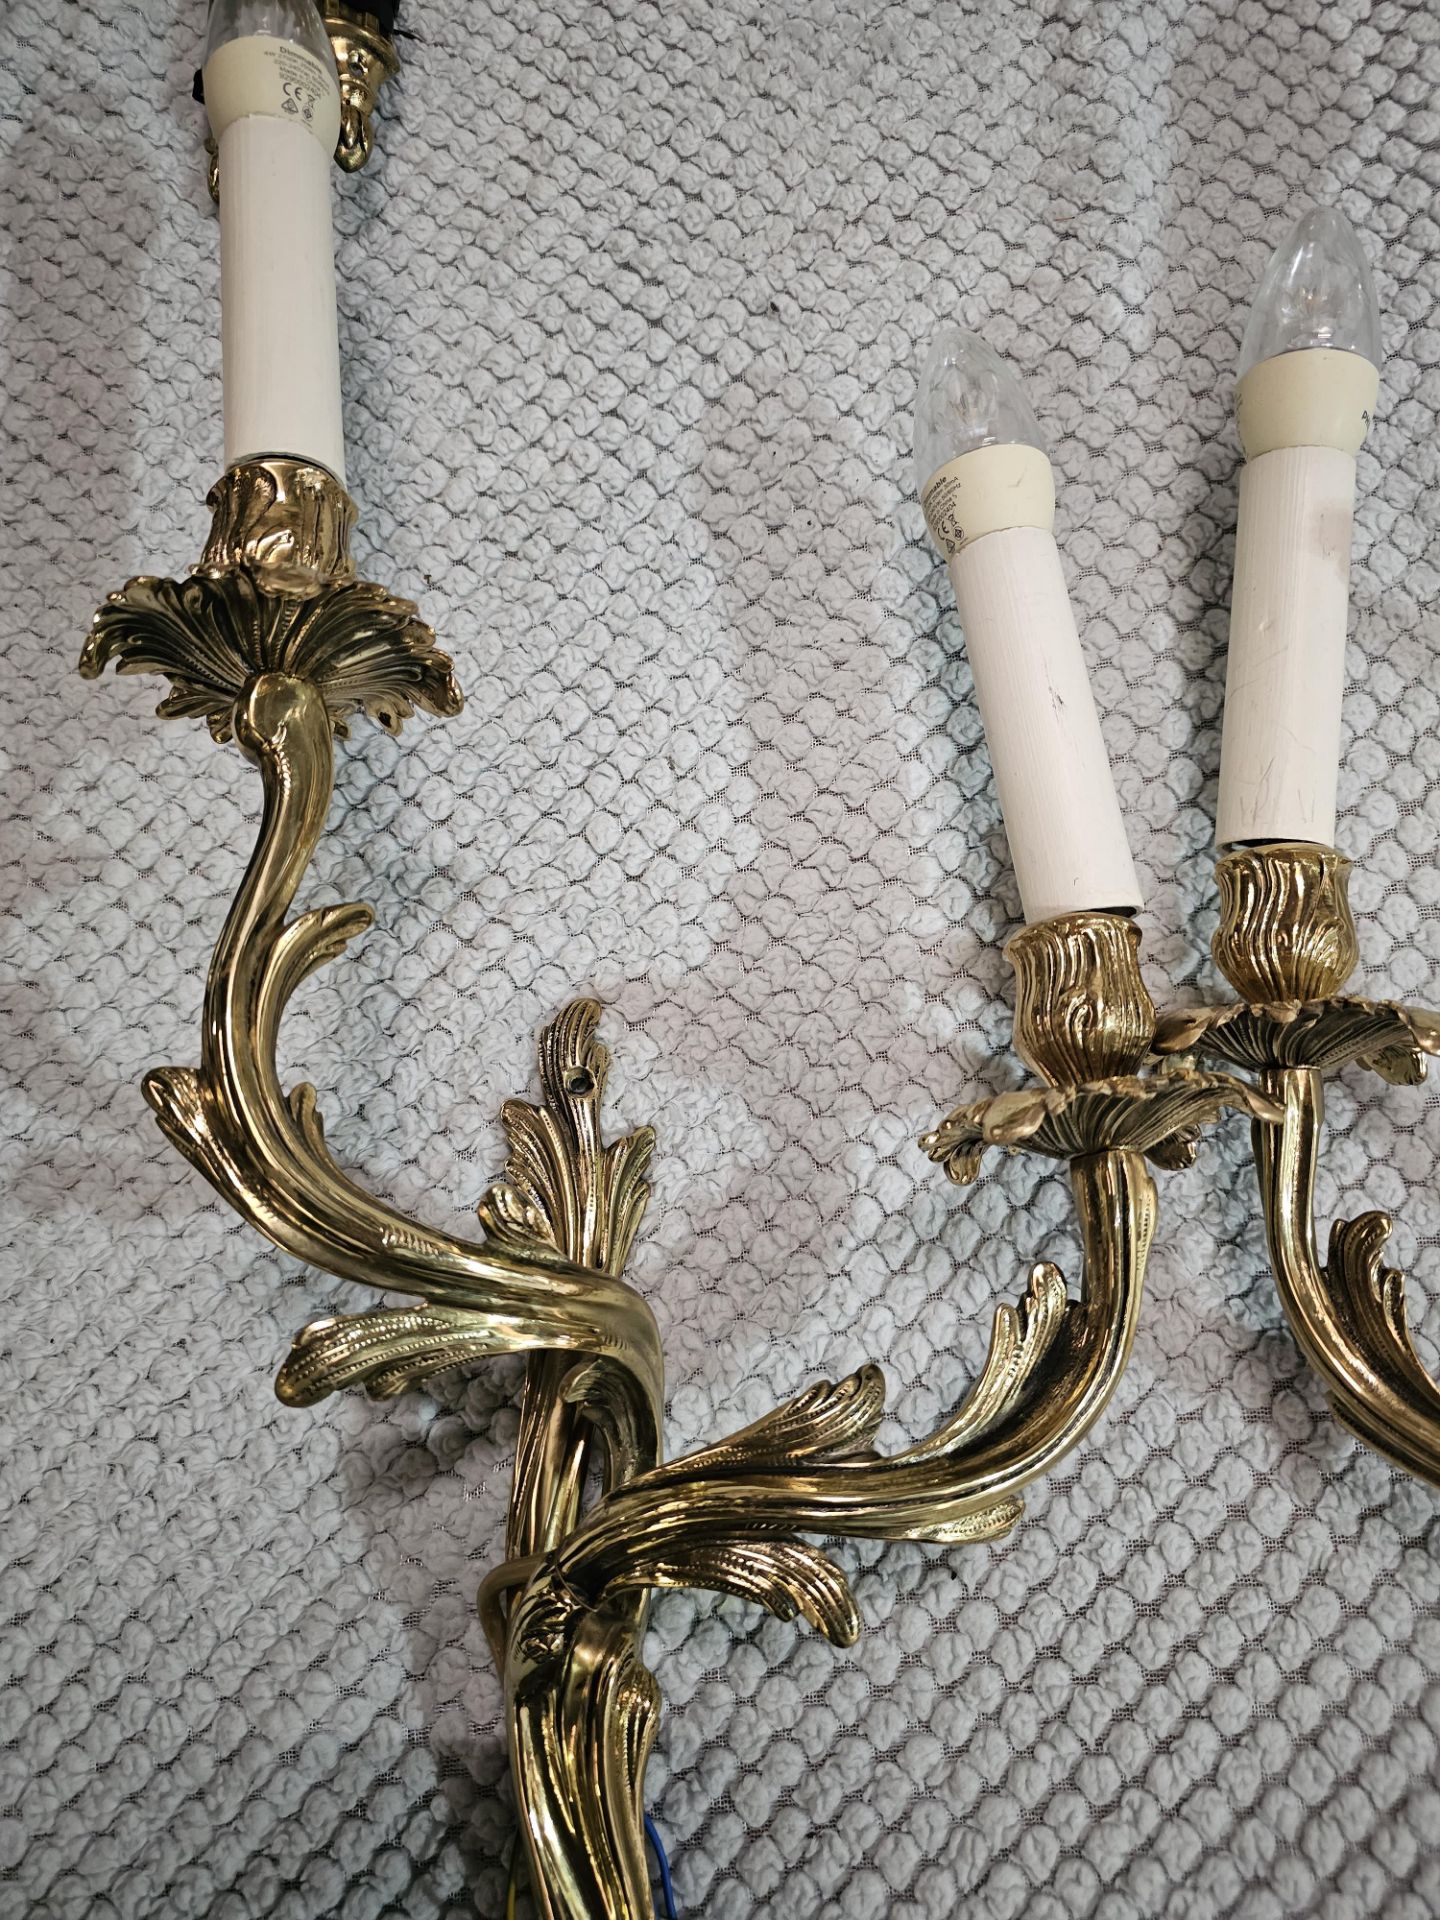 A Pair Of Louis XV Style Wall Appliques In Gilt Bronze With Two Candles Agrafe Decor On Which Are - Image 3 of 3